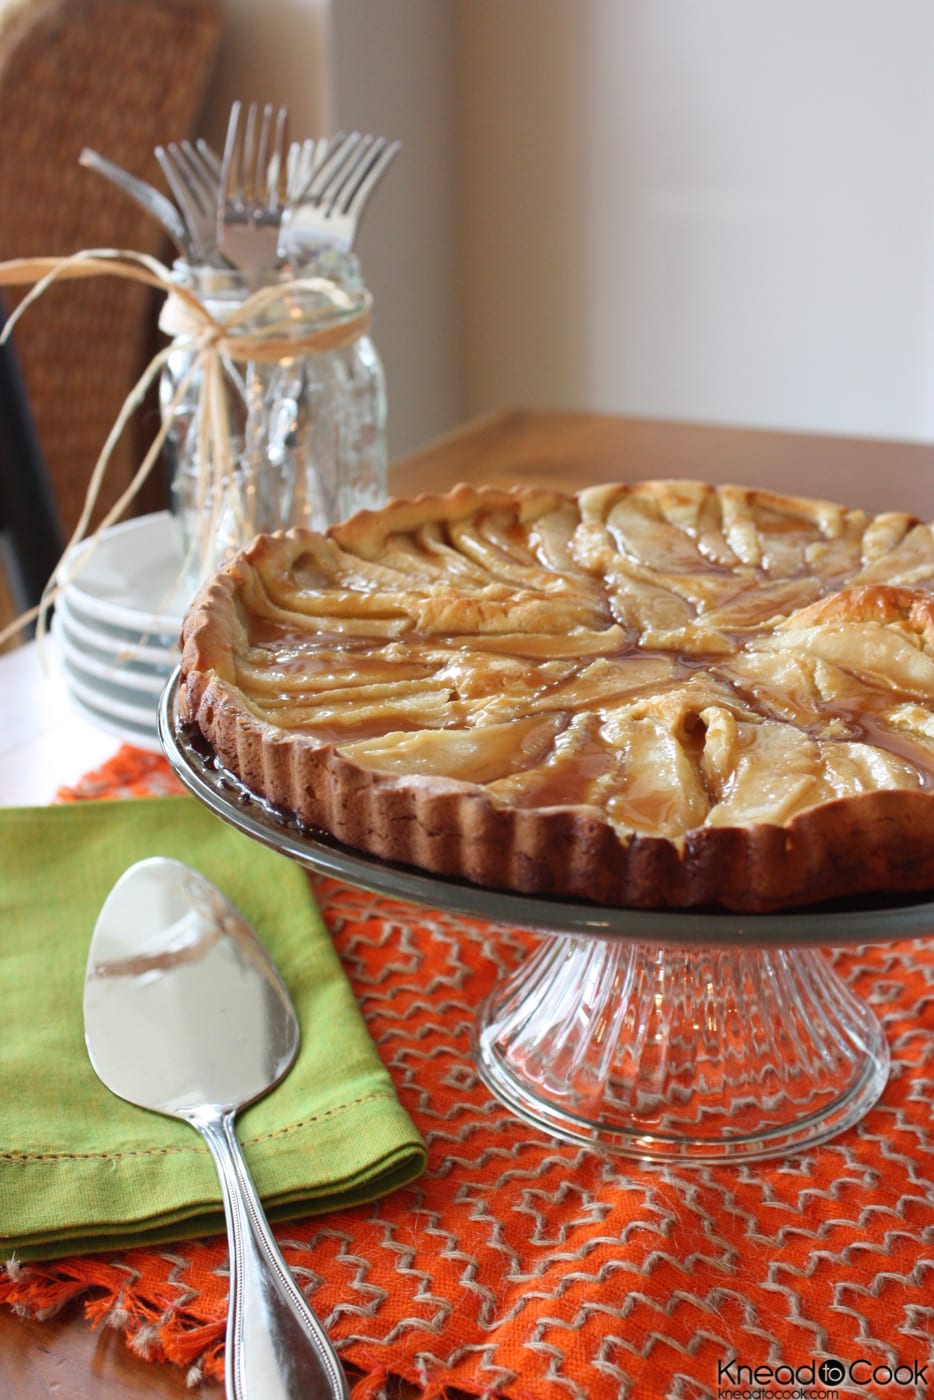 Almond and Pear Tart